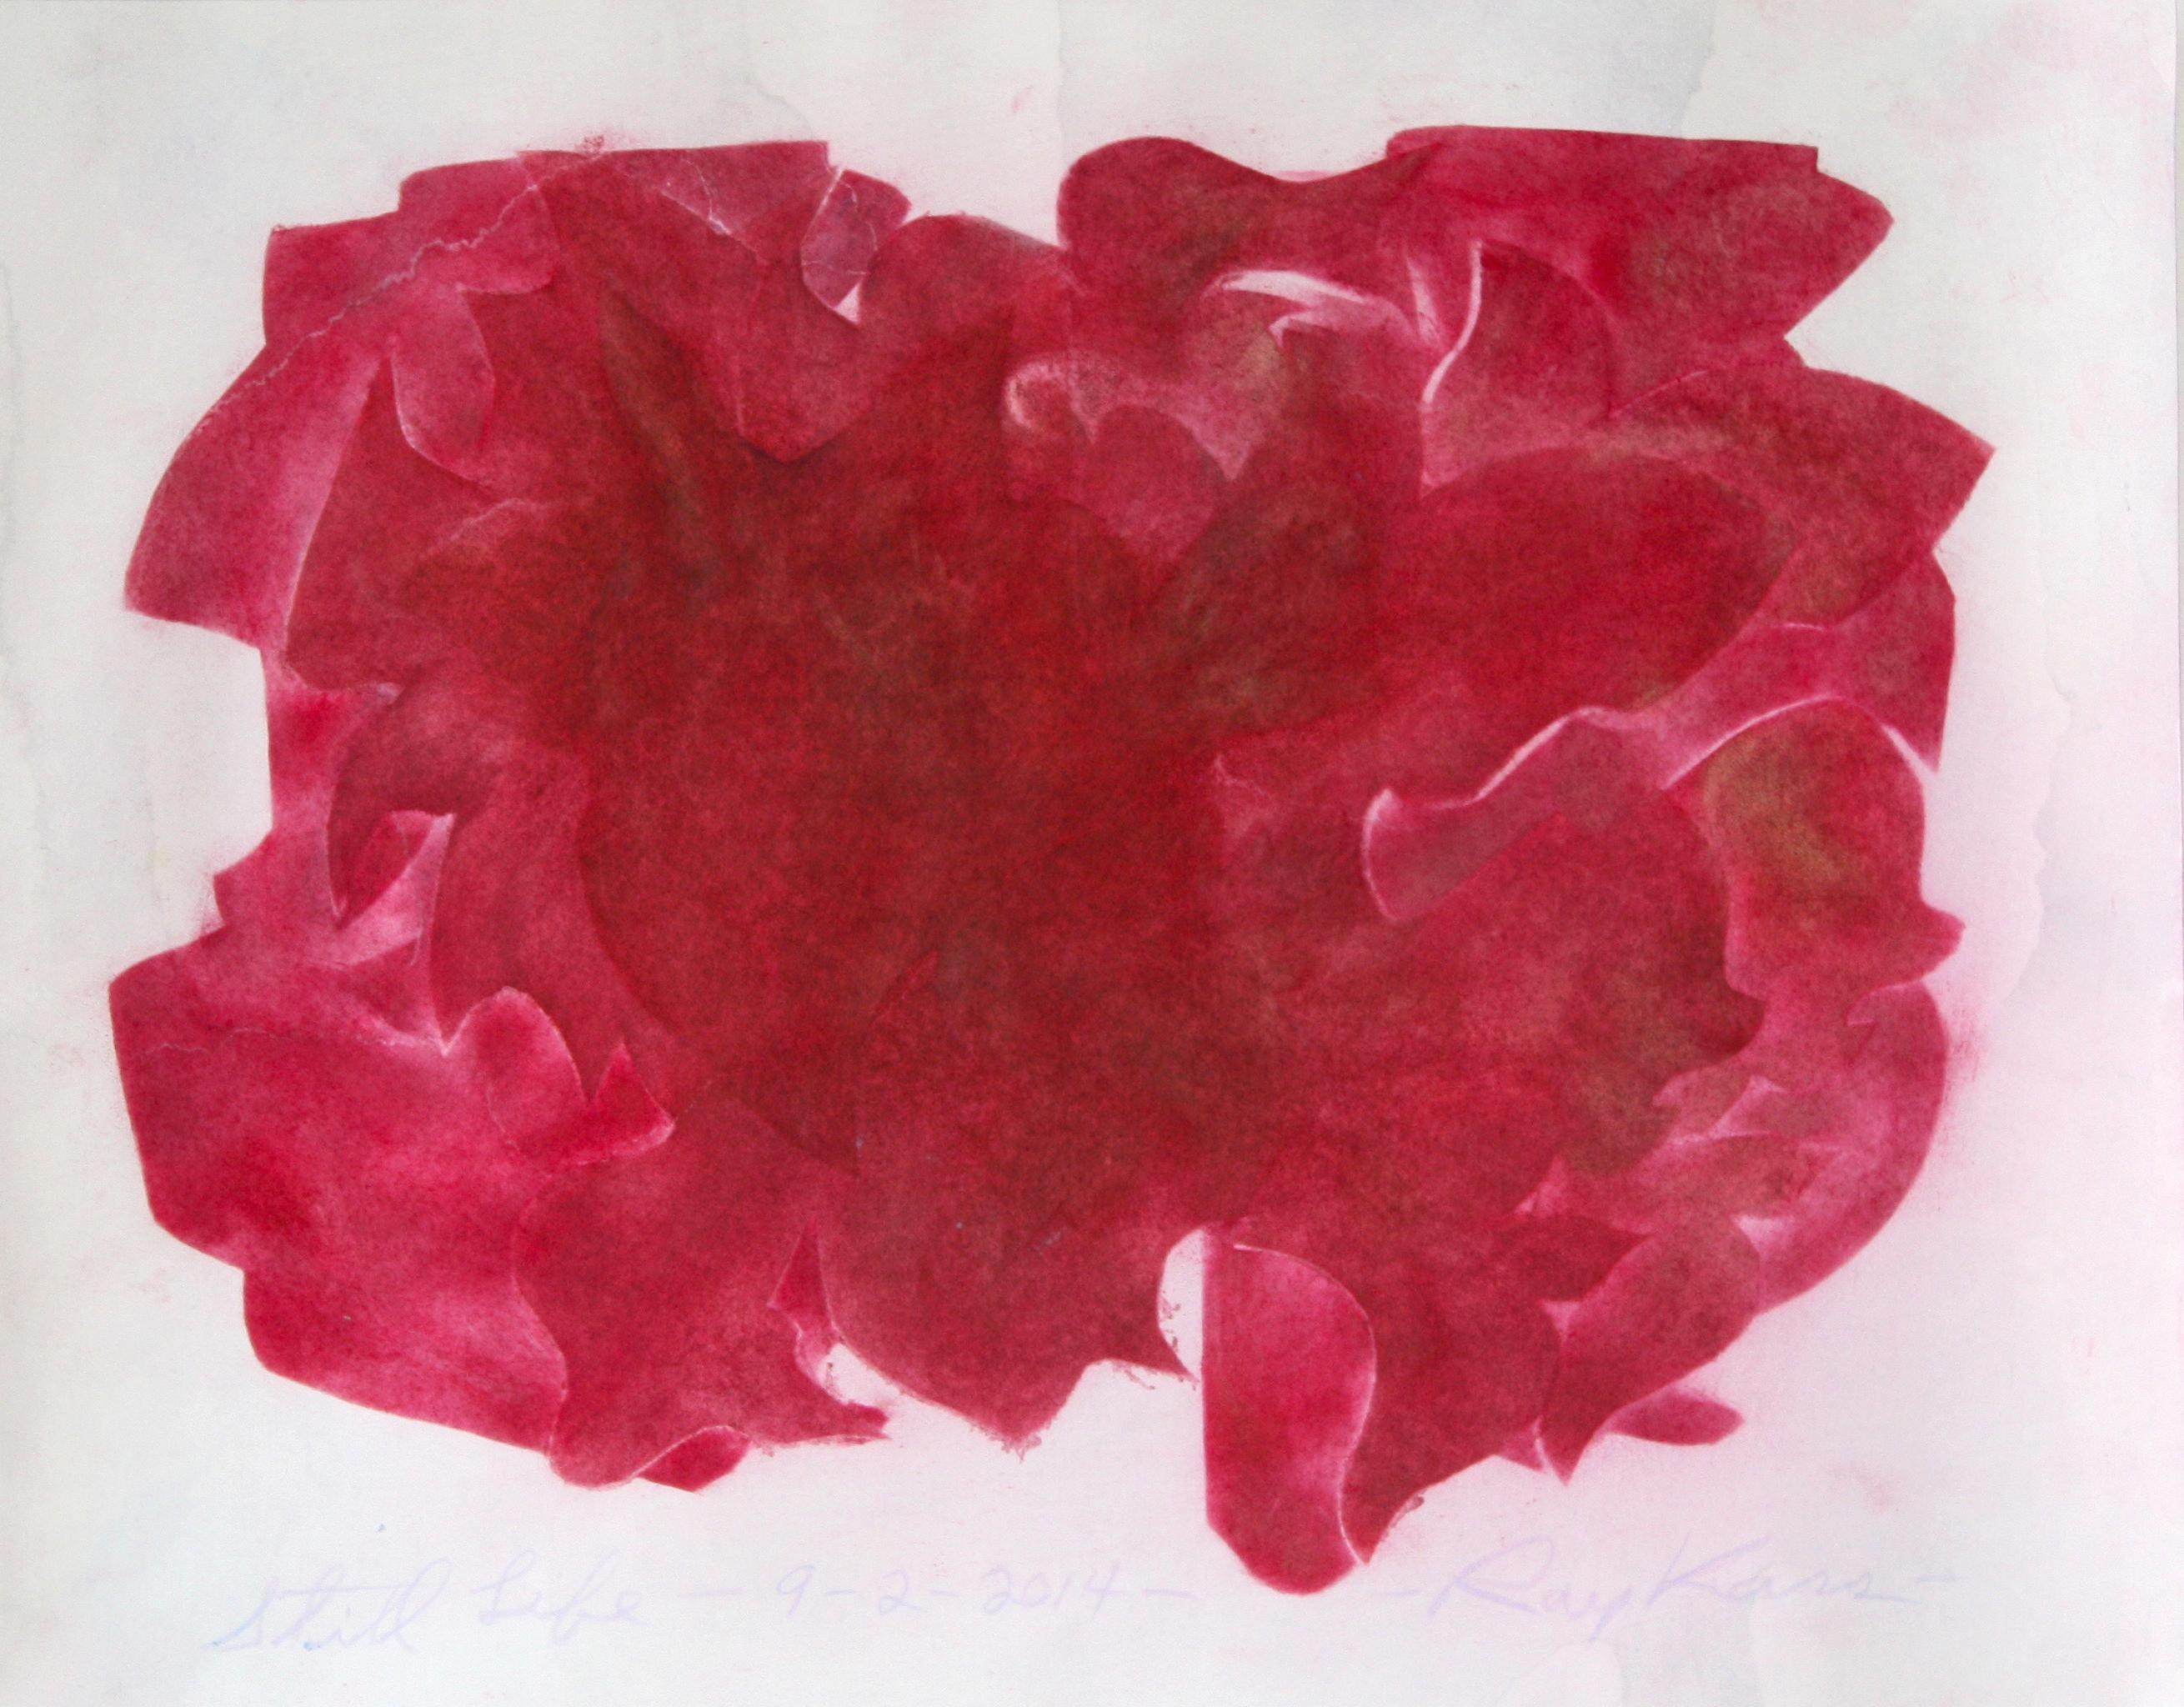 Ray Kass uses watercolor and other media to represent the processes of nature at work in his paintings. In his garden and landscape scenes, Kass captures texture, light and form in geometric bursts of red. The resulting playful, organic forms are